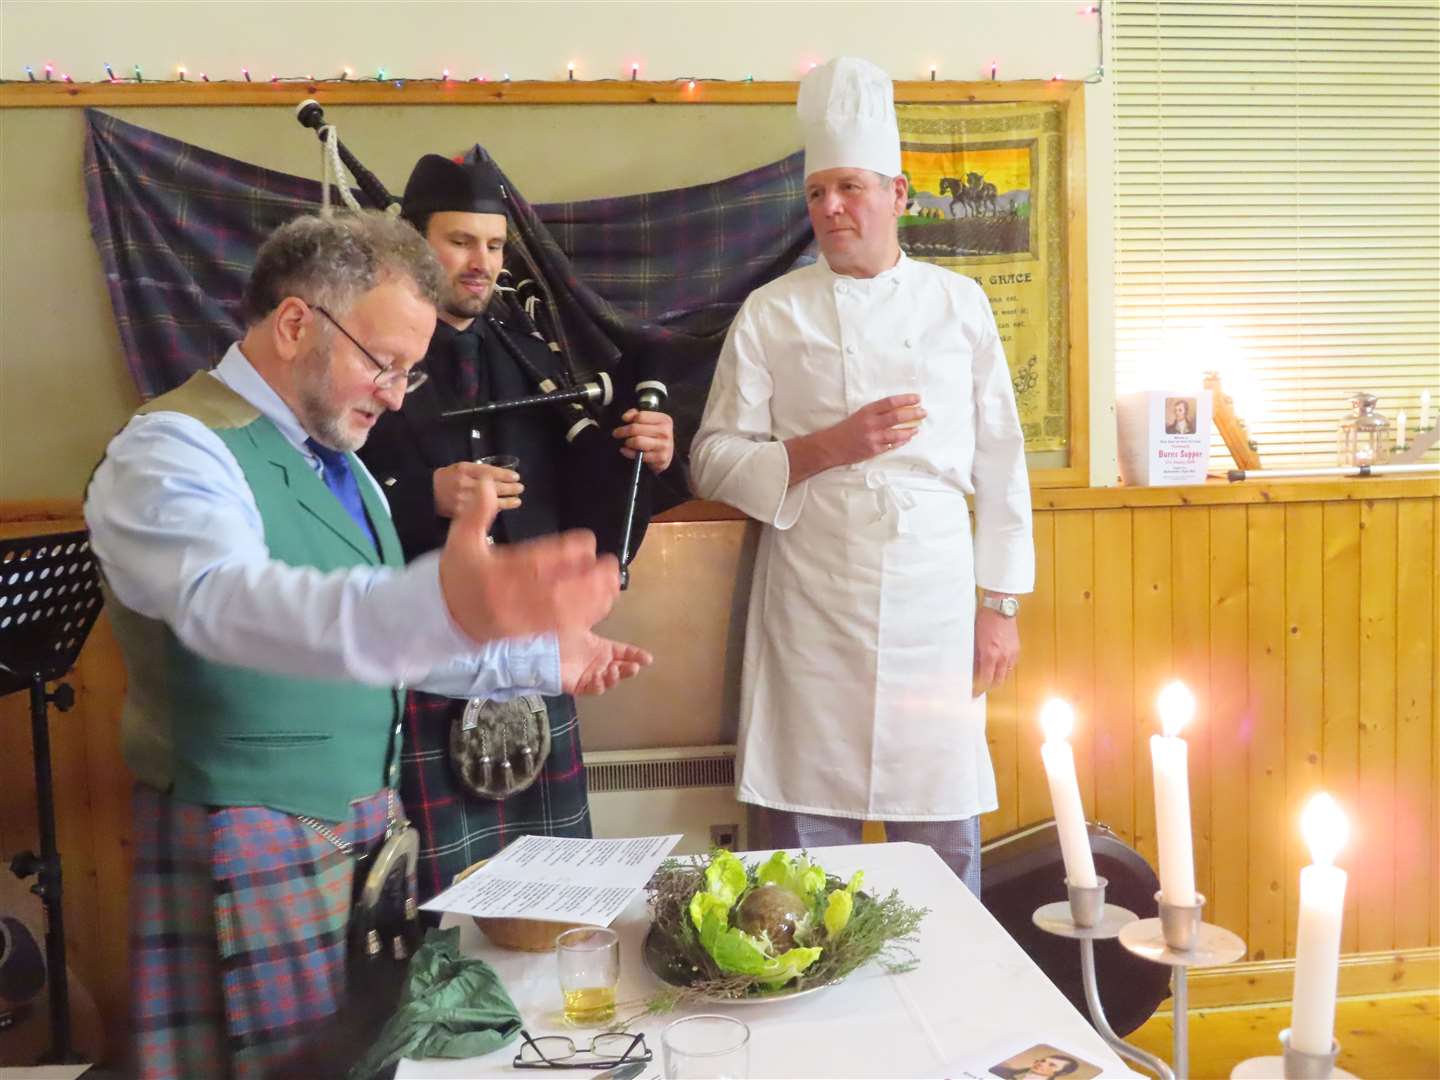 Jimmy MacDonald addresses the haggis after it was piped in by Malcom Paton. Chef Colin Howell looks on.